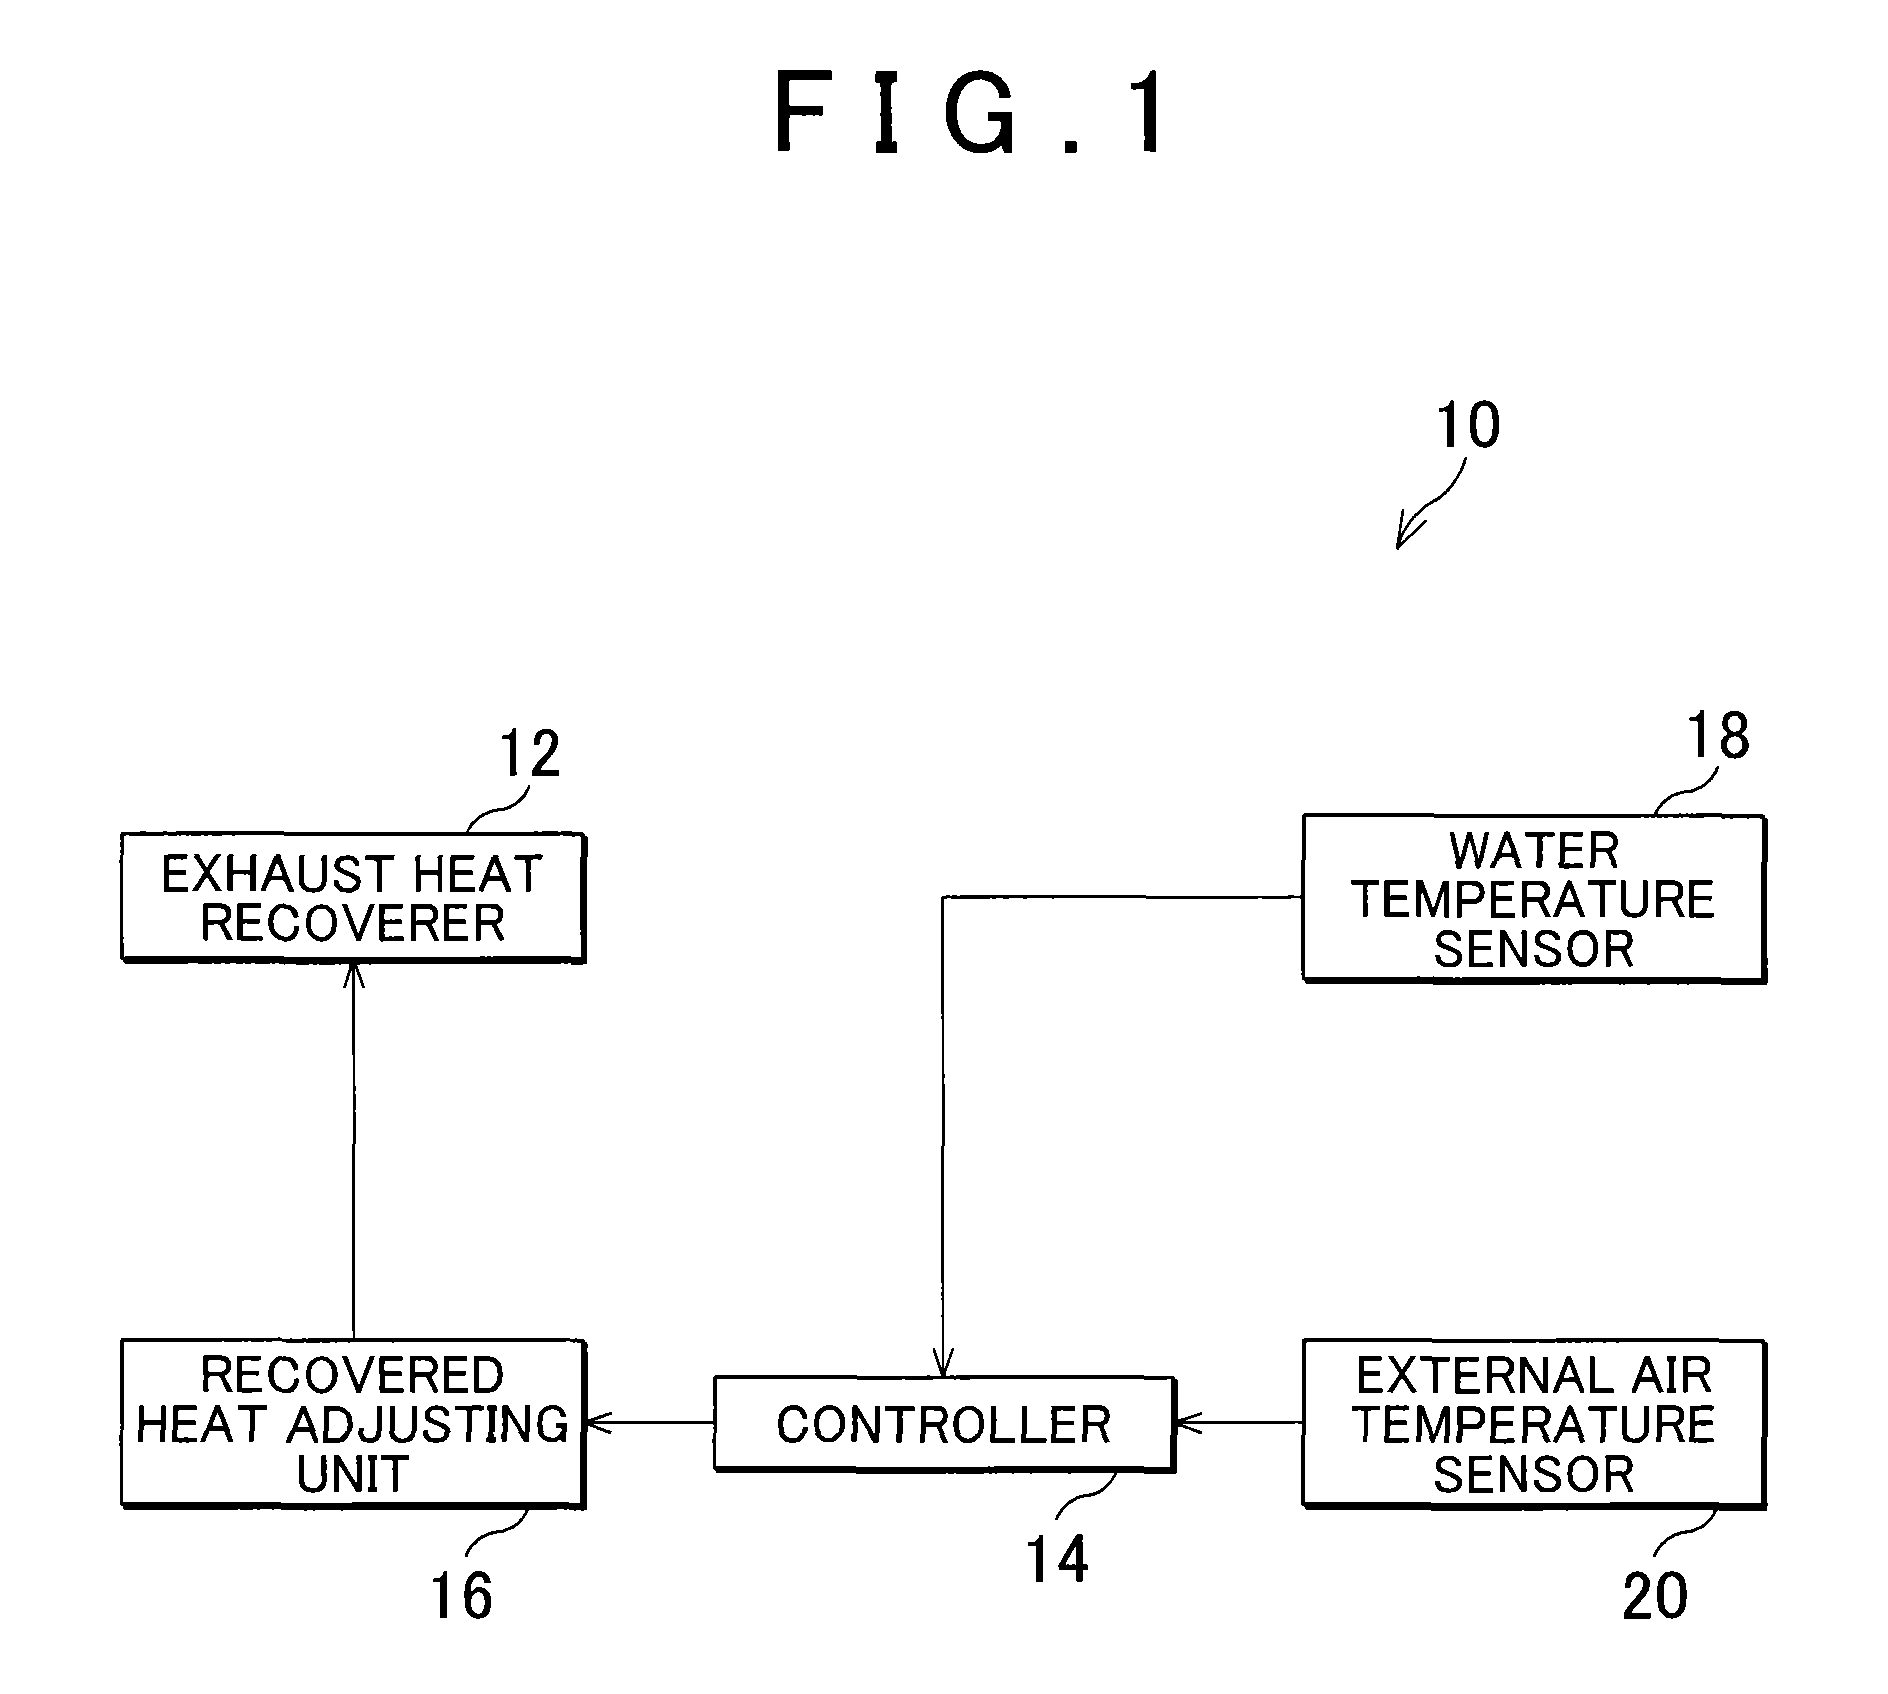 Exhaust heat recovery control device